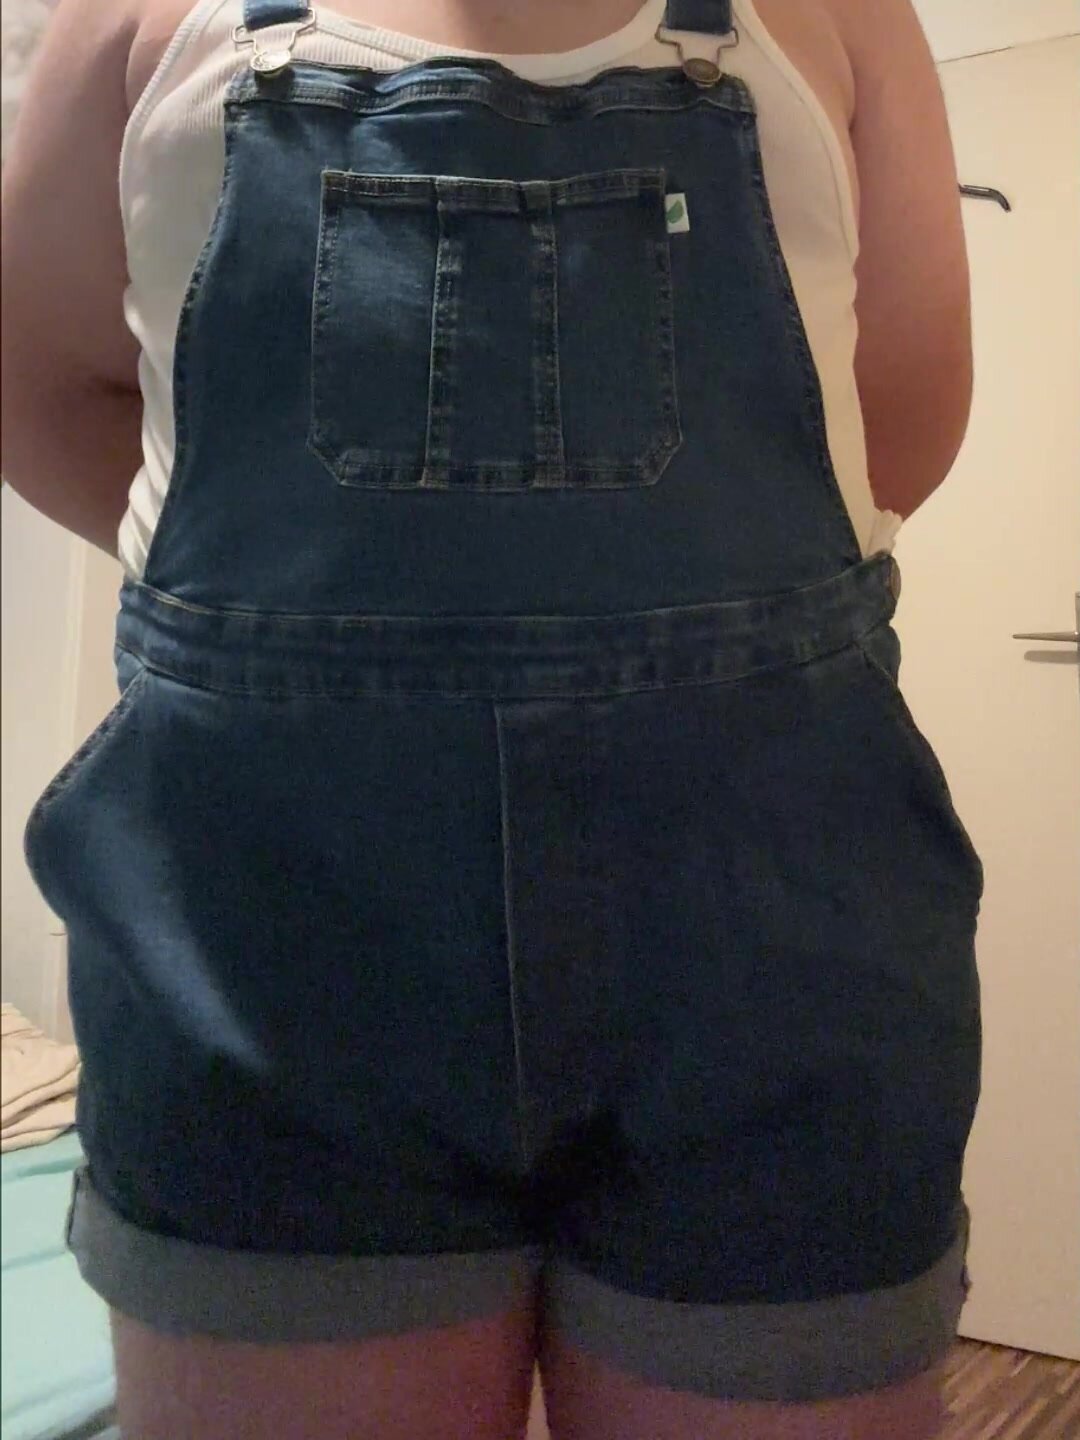 Peeing in my dungarees shorts